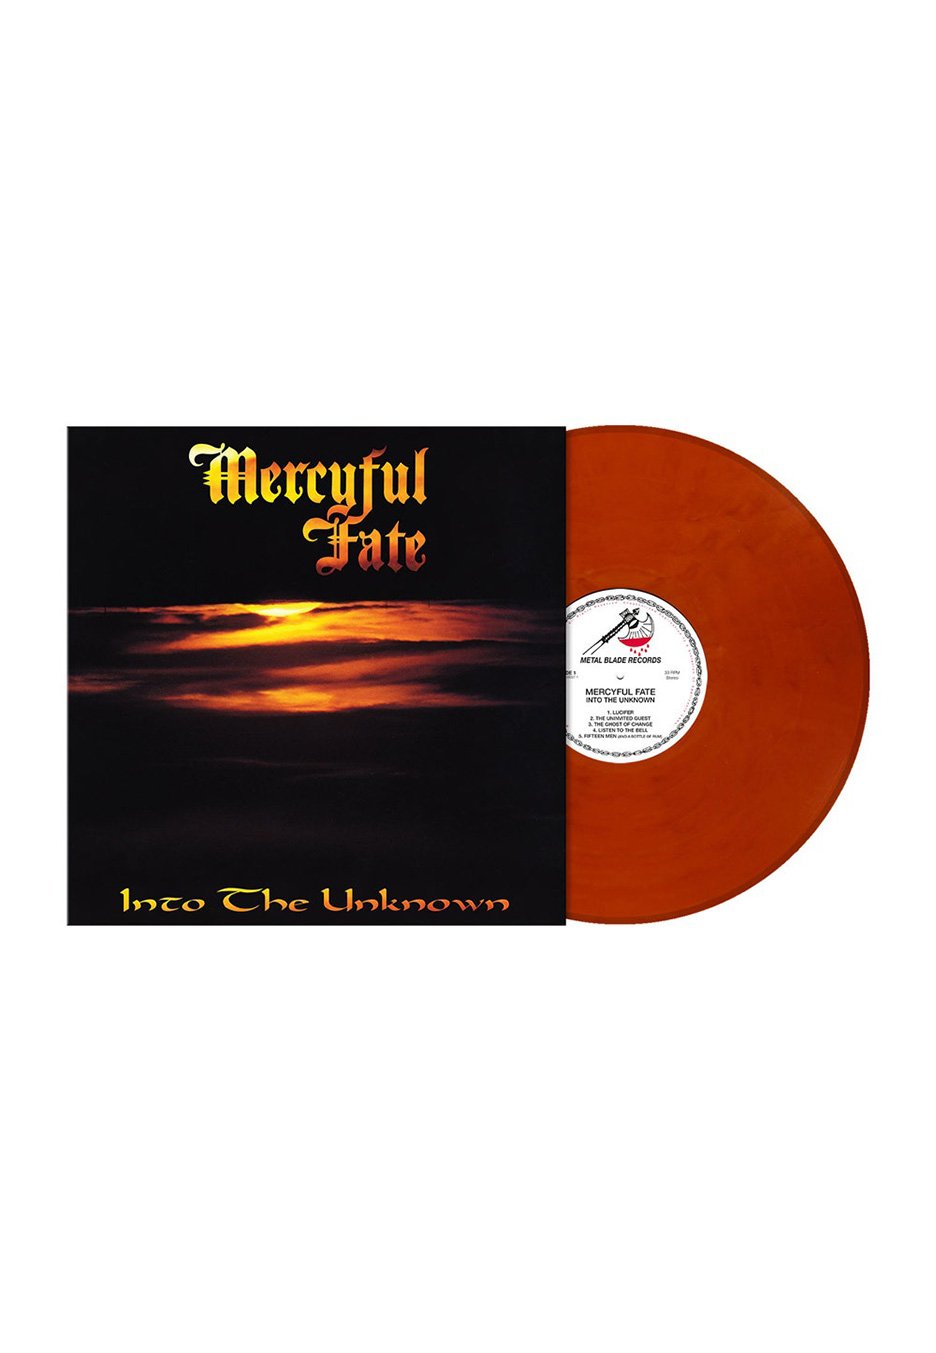 Mercyful Fate - Into The Unknown (Ri) Iced Tea - Marbled Vinyl